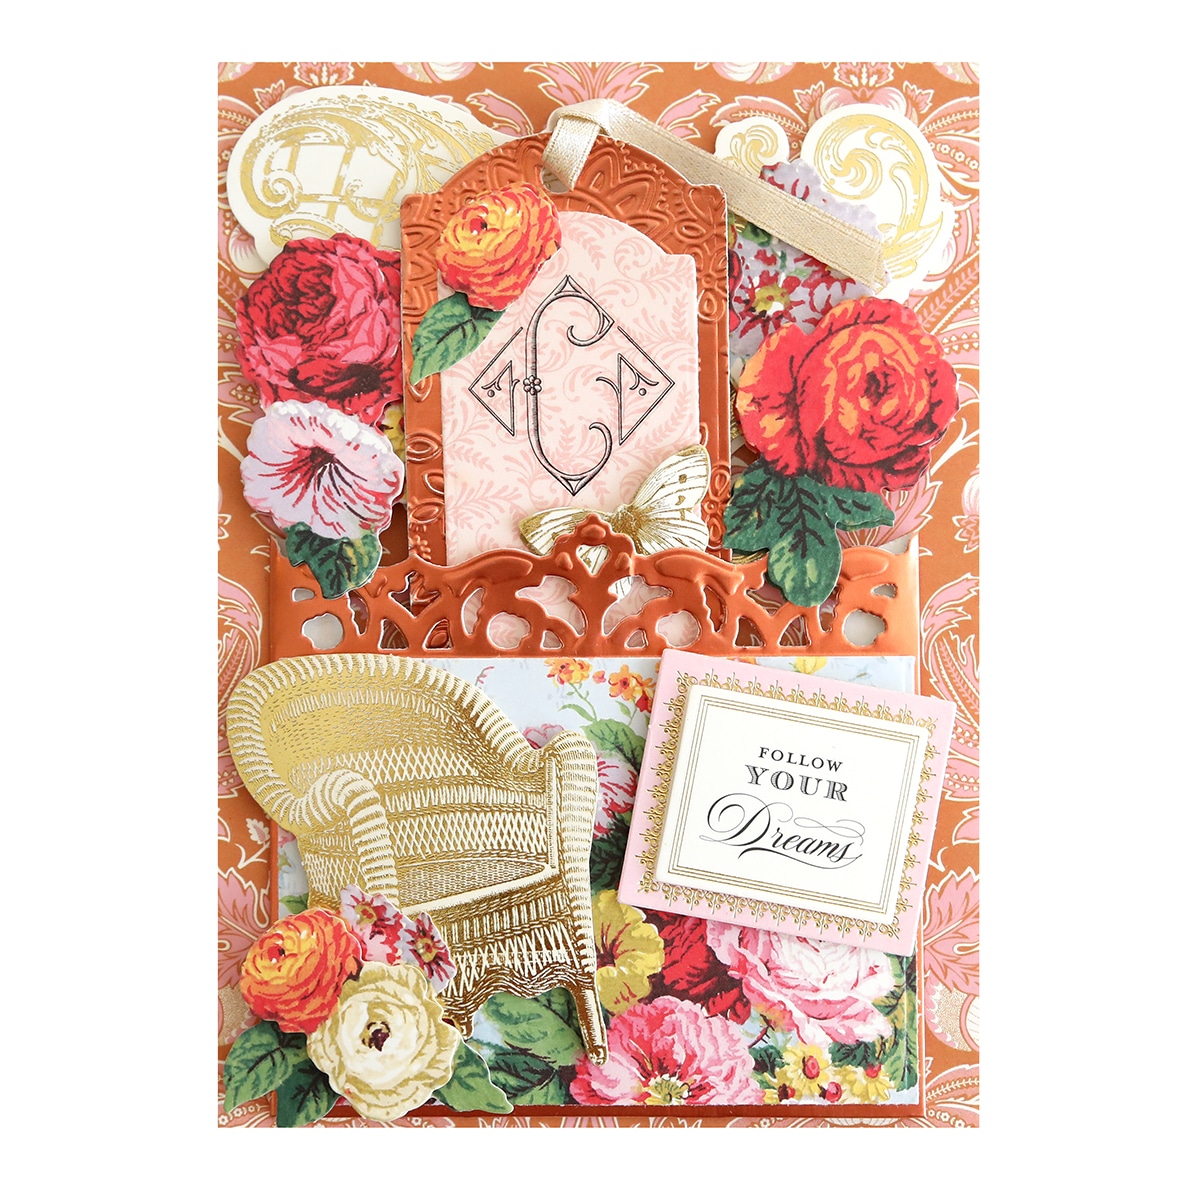 A card with flowers and a monogram on it.